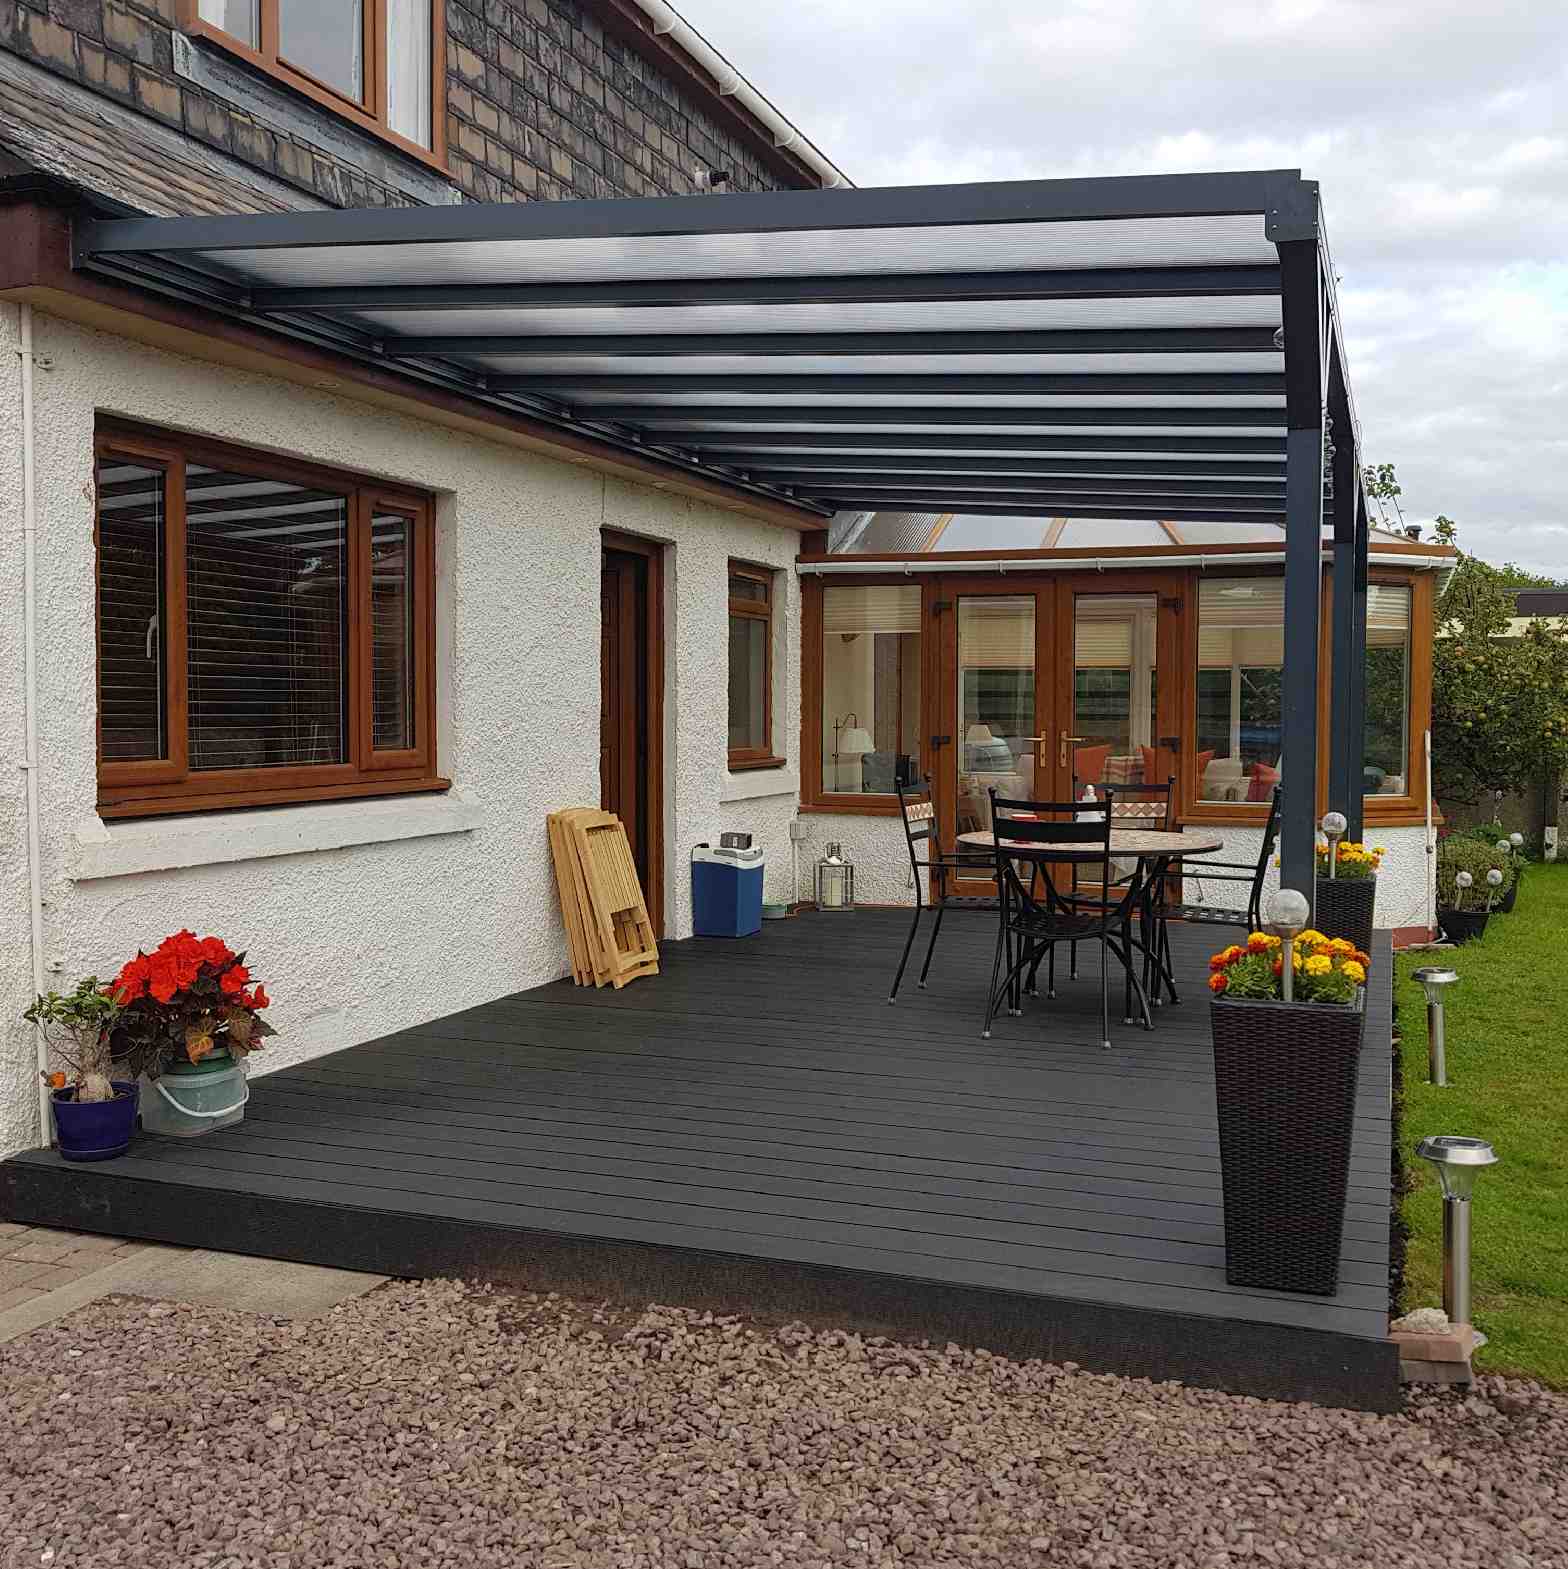 Buy Omega Verandah, Anthracite Grey, 16mm Polycarbonate Glazing - 5.2m (W) x 2.0m (P), (3) Supporting Posts online today